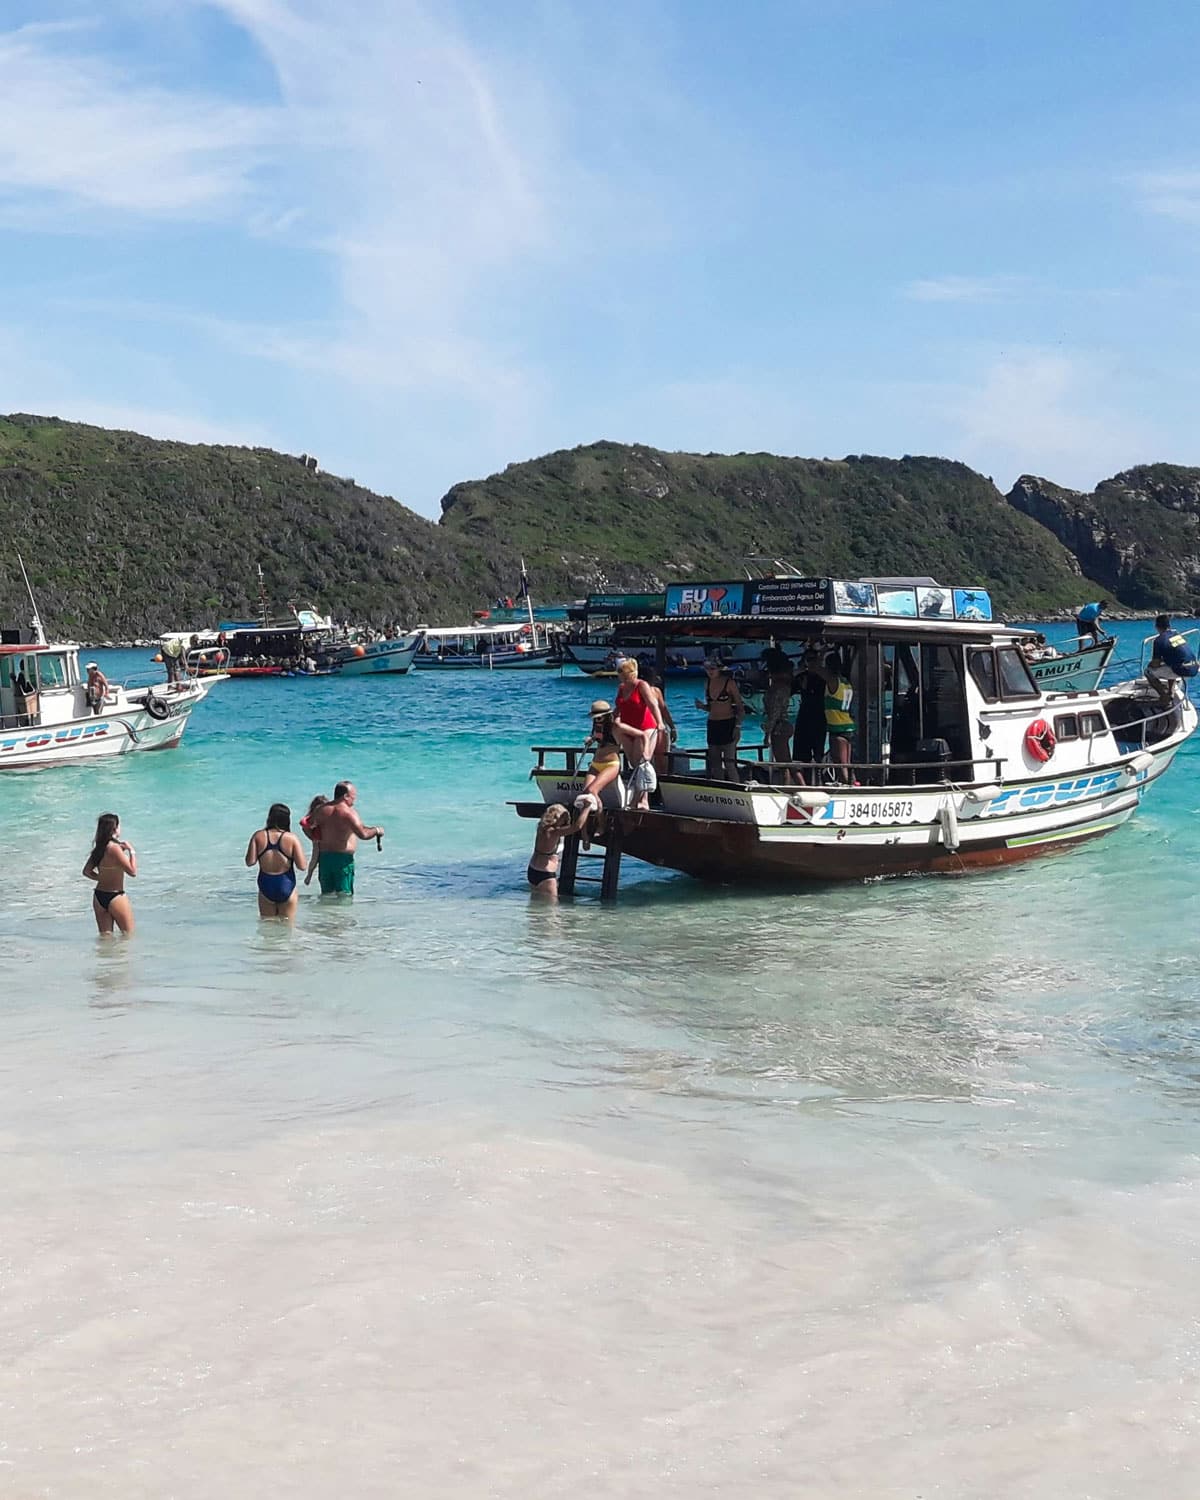 Tourists enjoy the clear turquoise waters at Farol Beach in Arraial do Cabo, Brazil. Multiple boats are moored near the shore, with people disembarking into the shallow water. The scene captures a bustling day at one of the most popular beaches in Arraial do Cabo, surrounded by lush green hills under a bright blue sky.